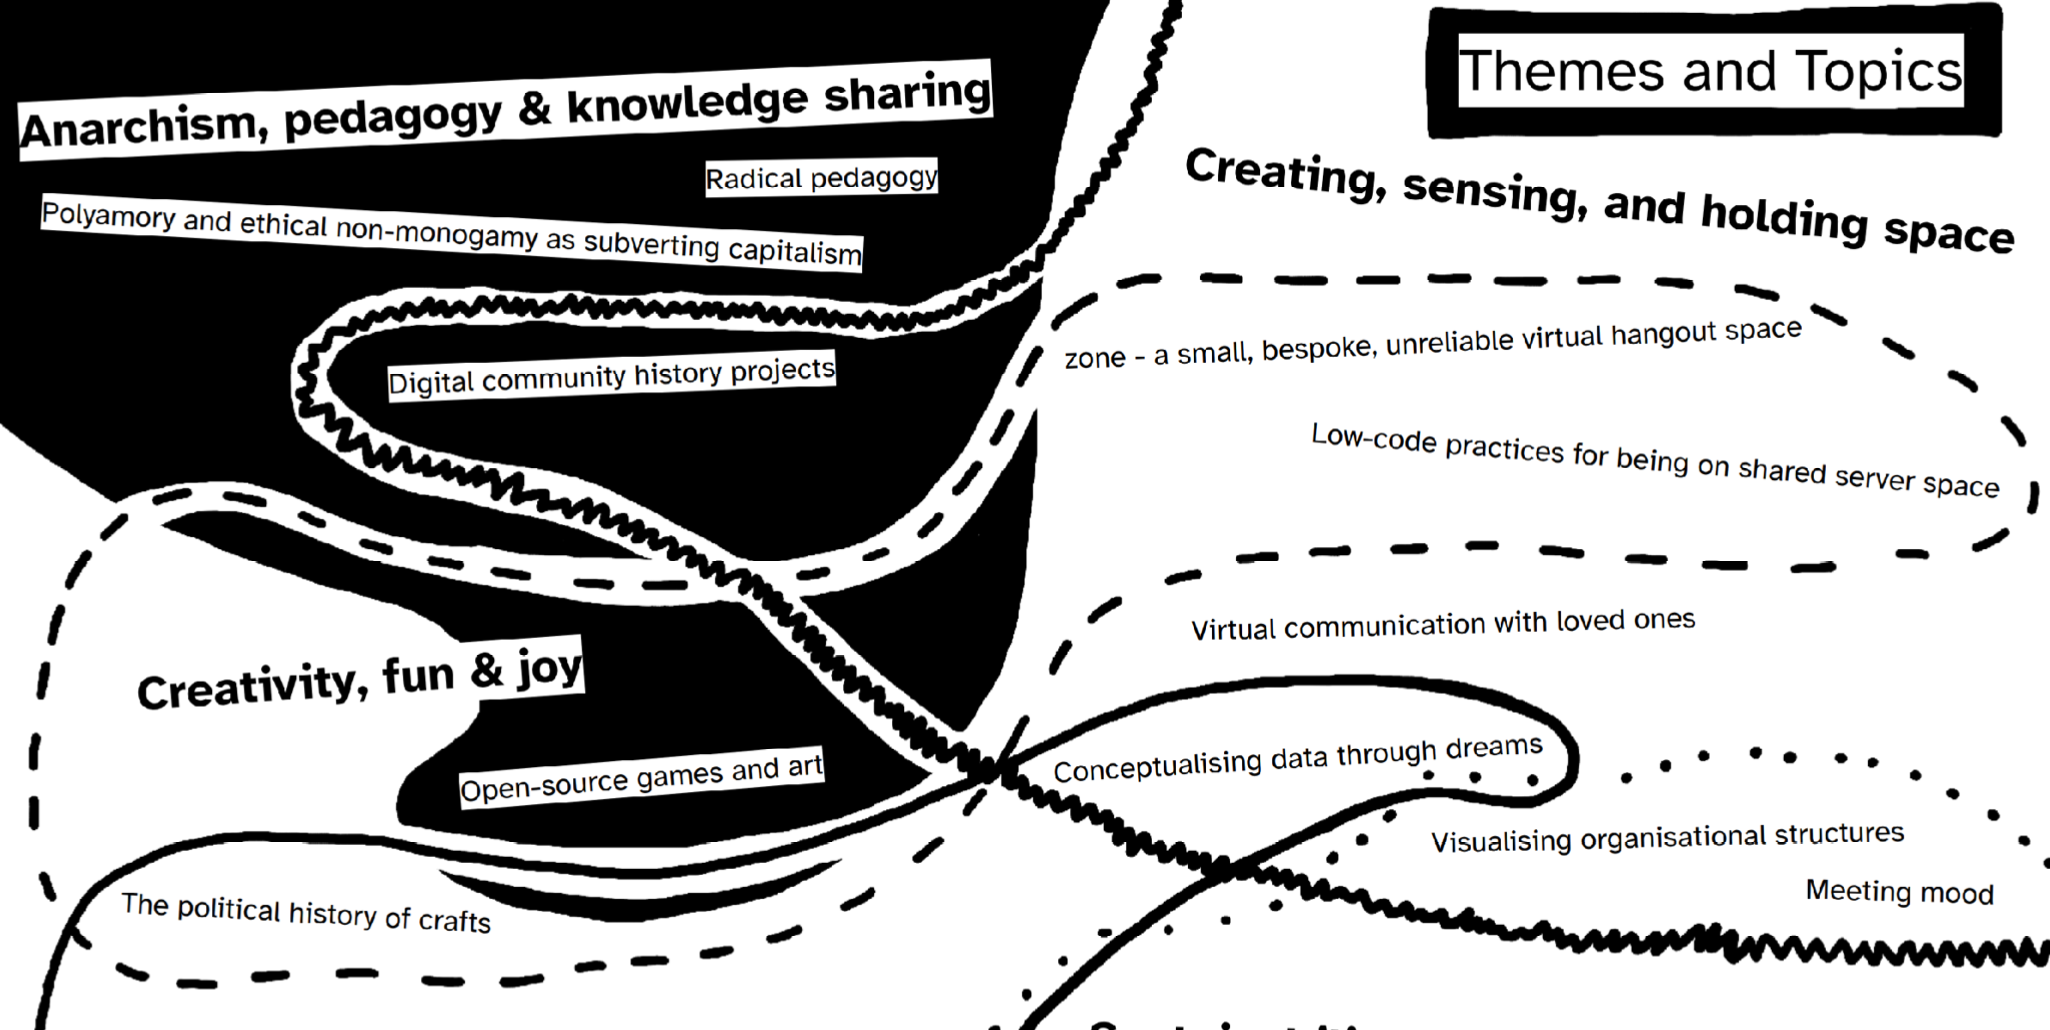 a black and white diagram showing the themes and topics visually organised, showing overlapping areas between themes